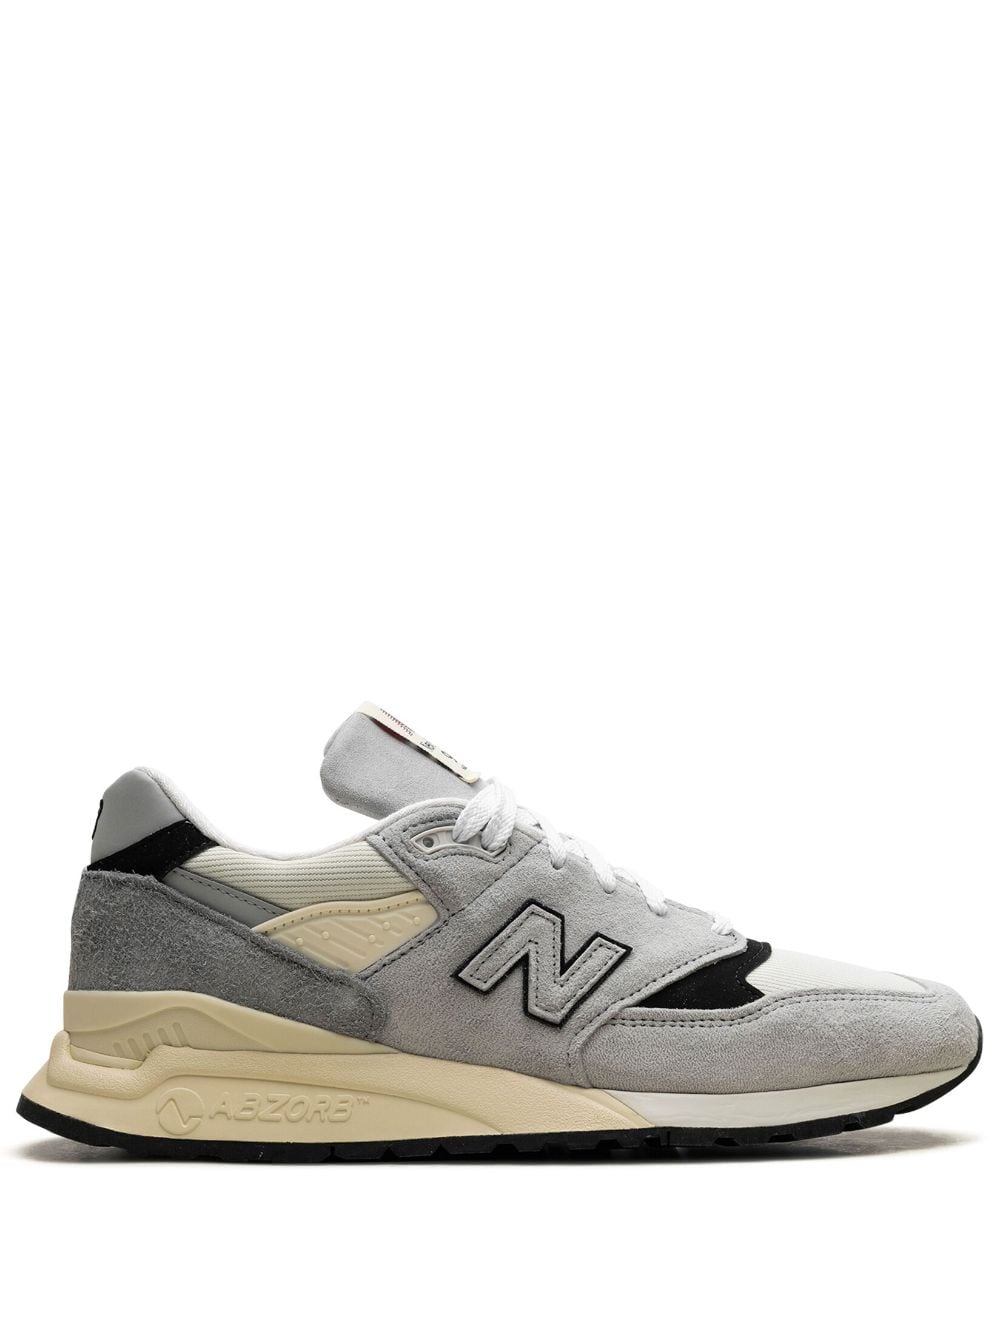 New Balance 998 Made in USA "Grey" sneakers - Grijs